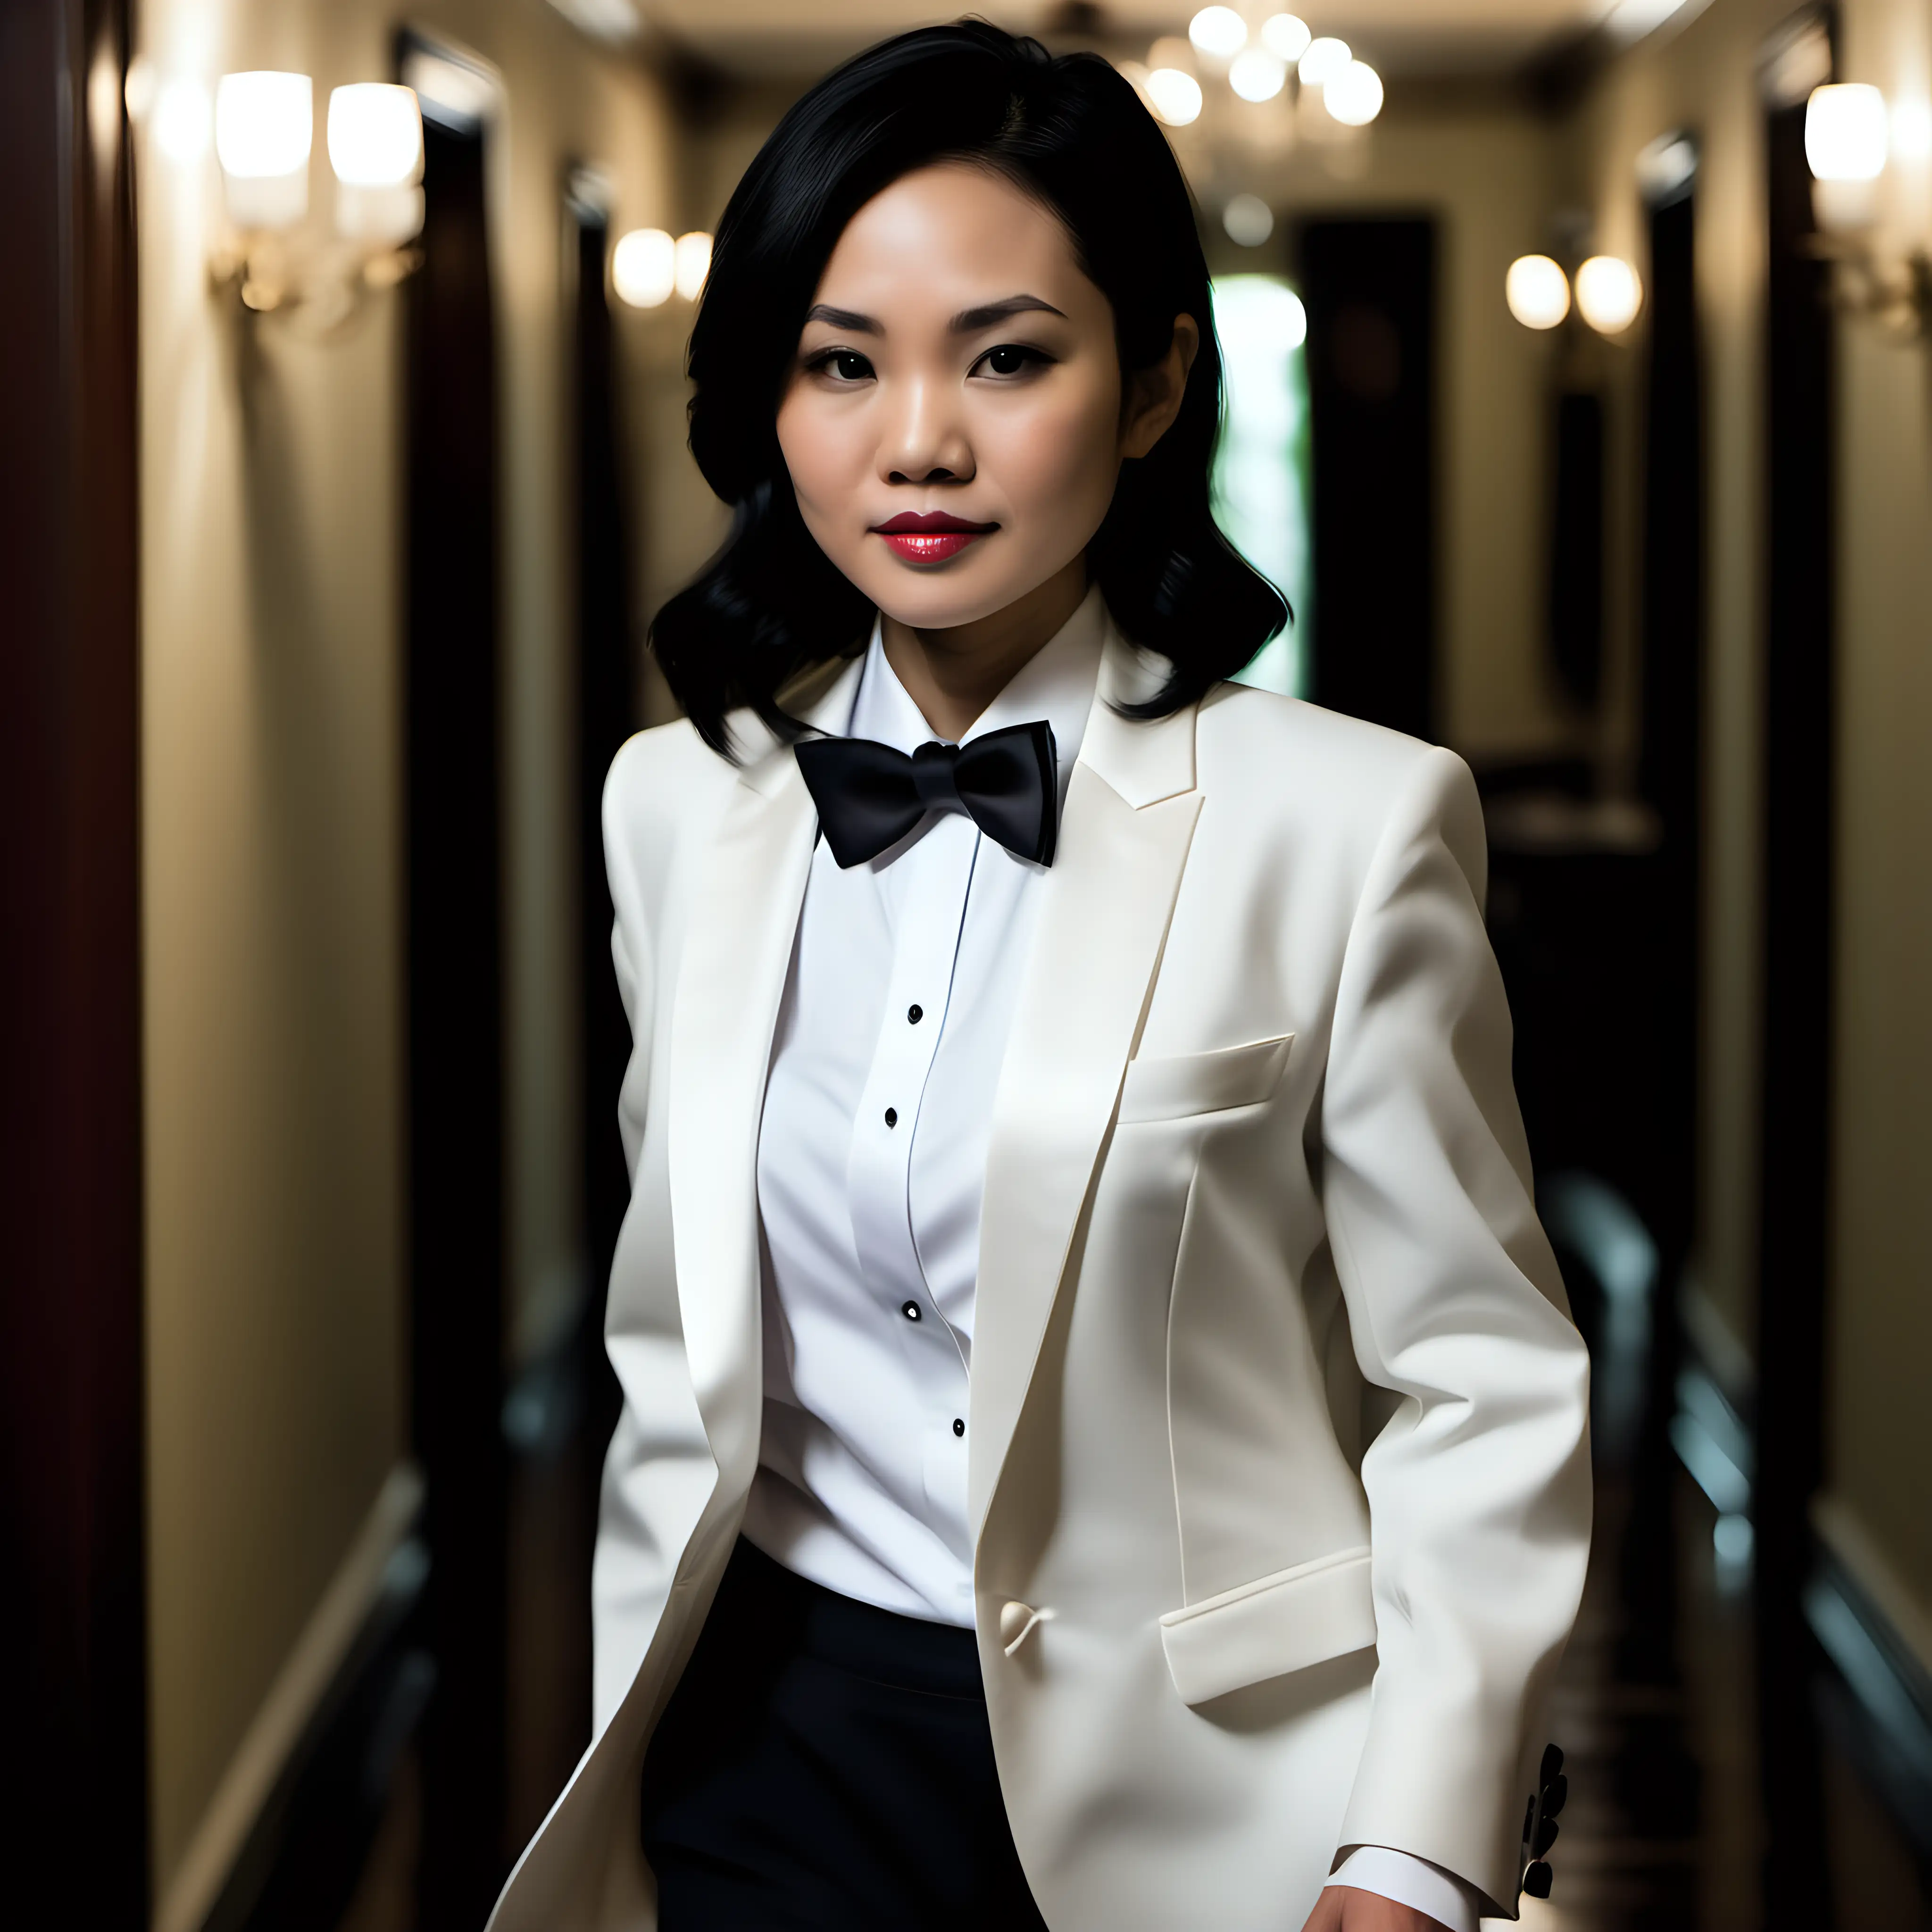 A petite 35-year-old attractive Vietnamese woman with black shoulder-length hair, wearing a formal tuxedo with an ivory dinner jacket, a black bow tie, and black cufflinks. Her shirt has French cuffs. The jacket is open and has a corsage. She is walking down a dark hallway in a mansion.